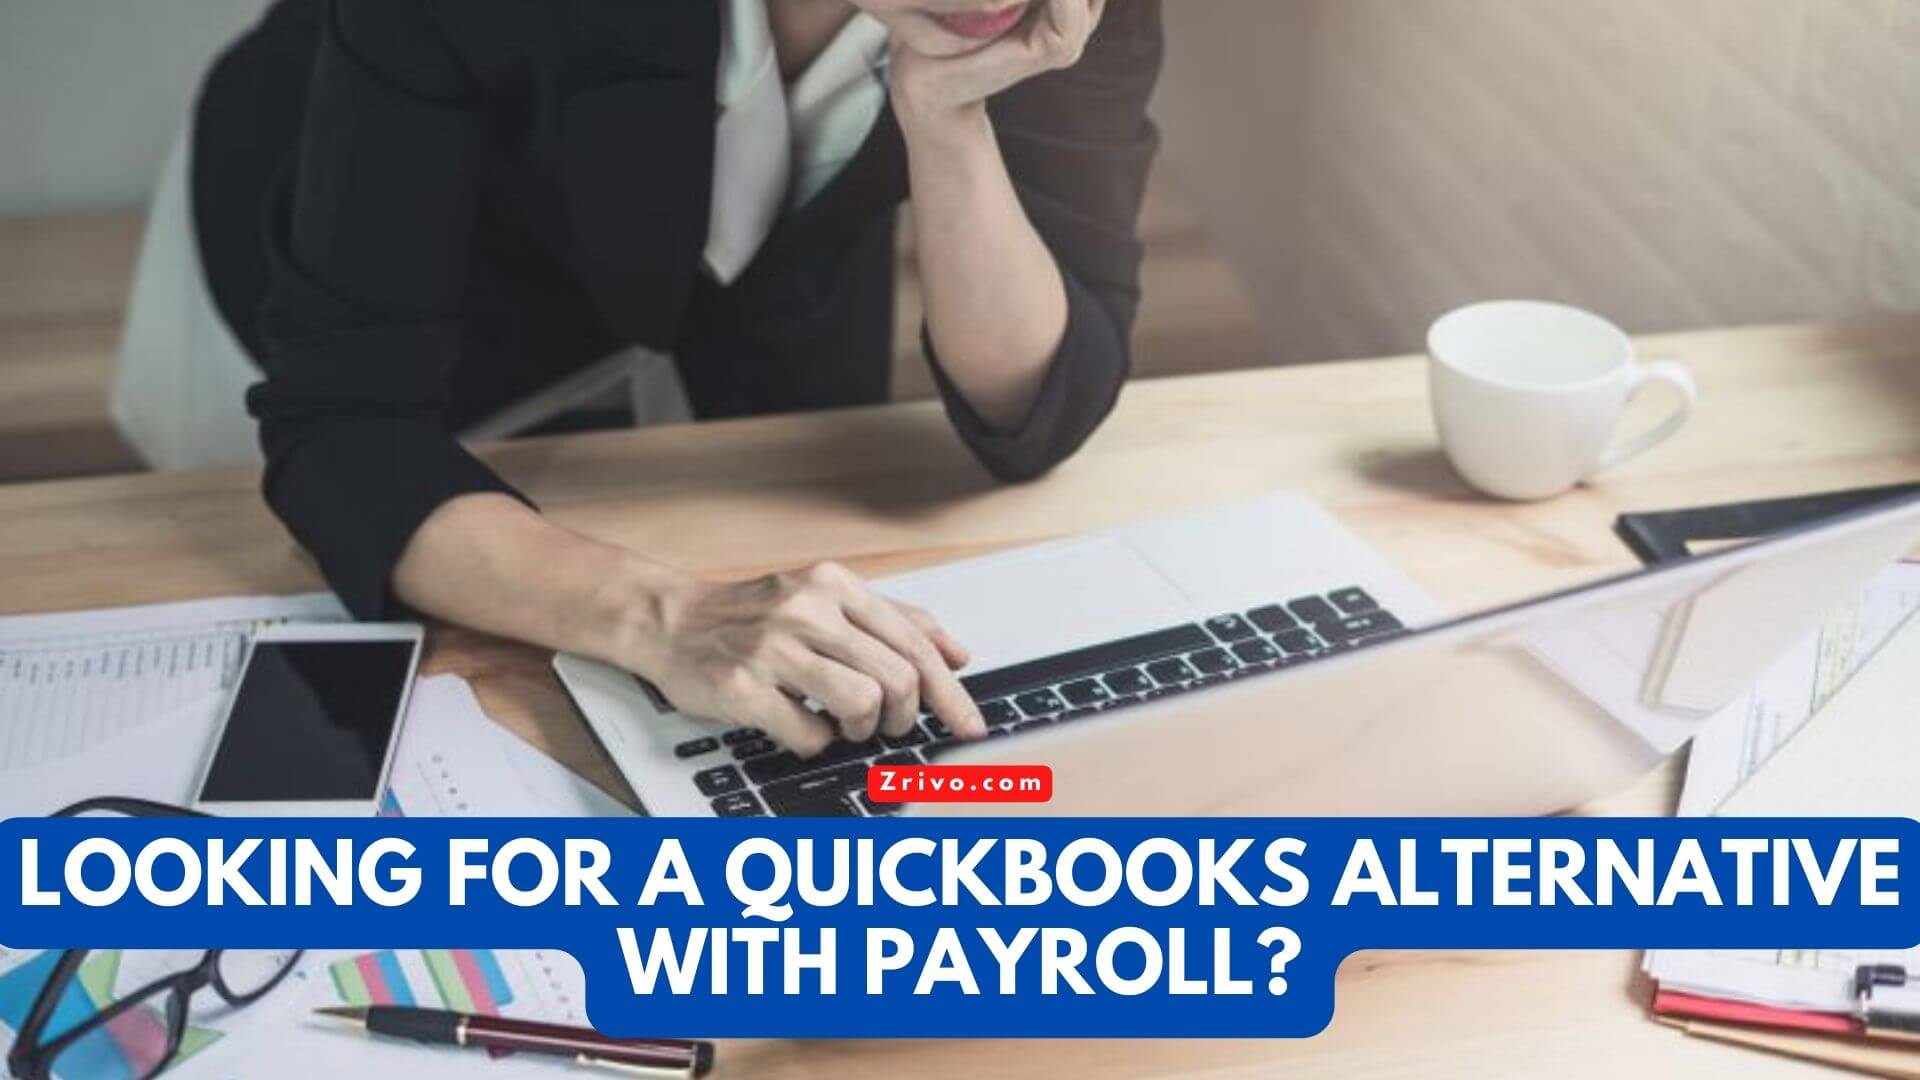 Looking For a QuickBooks Alternative With Payroll?